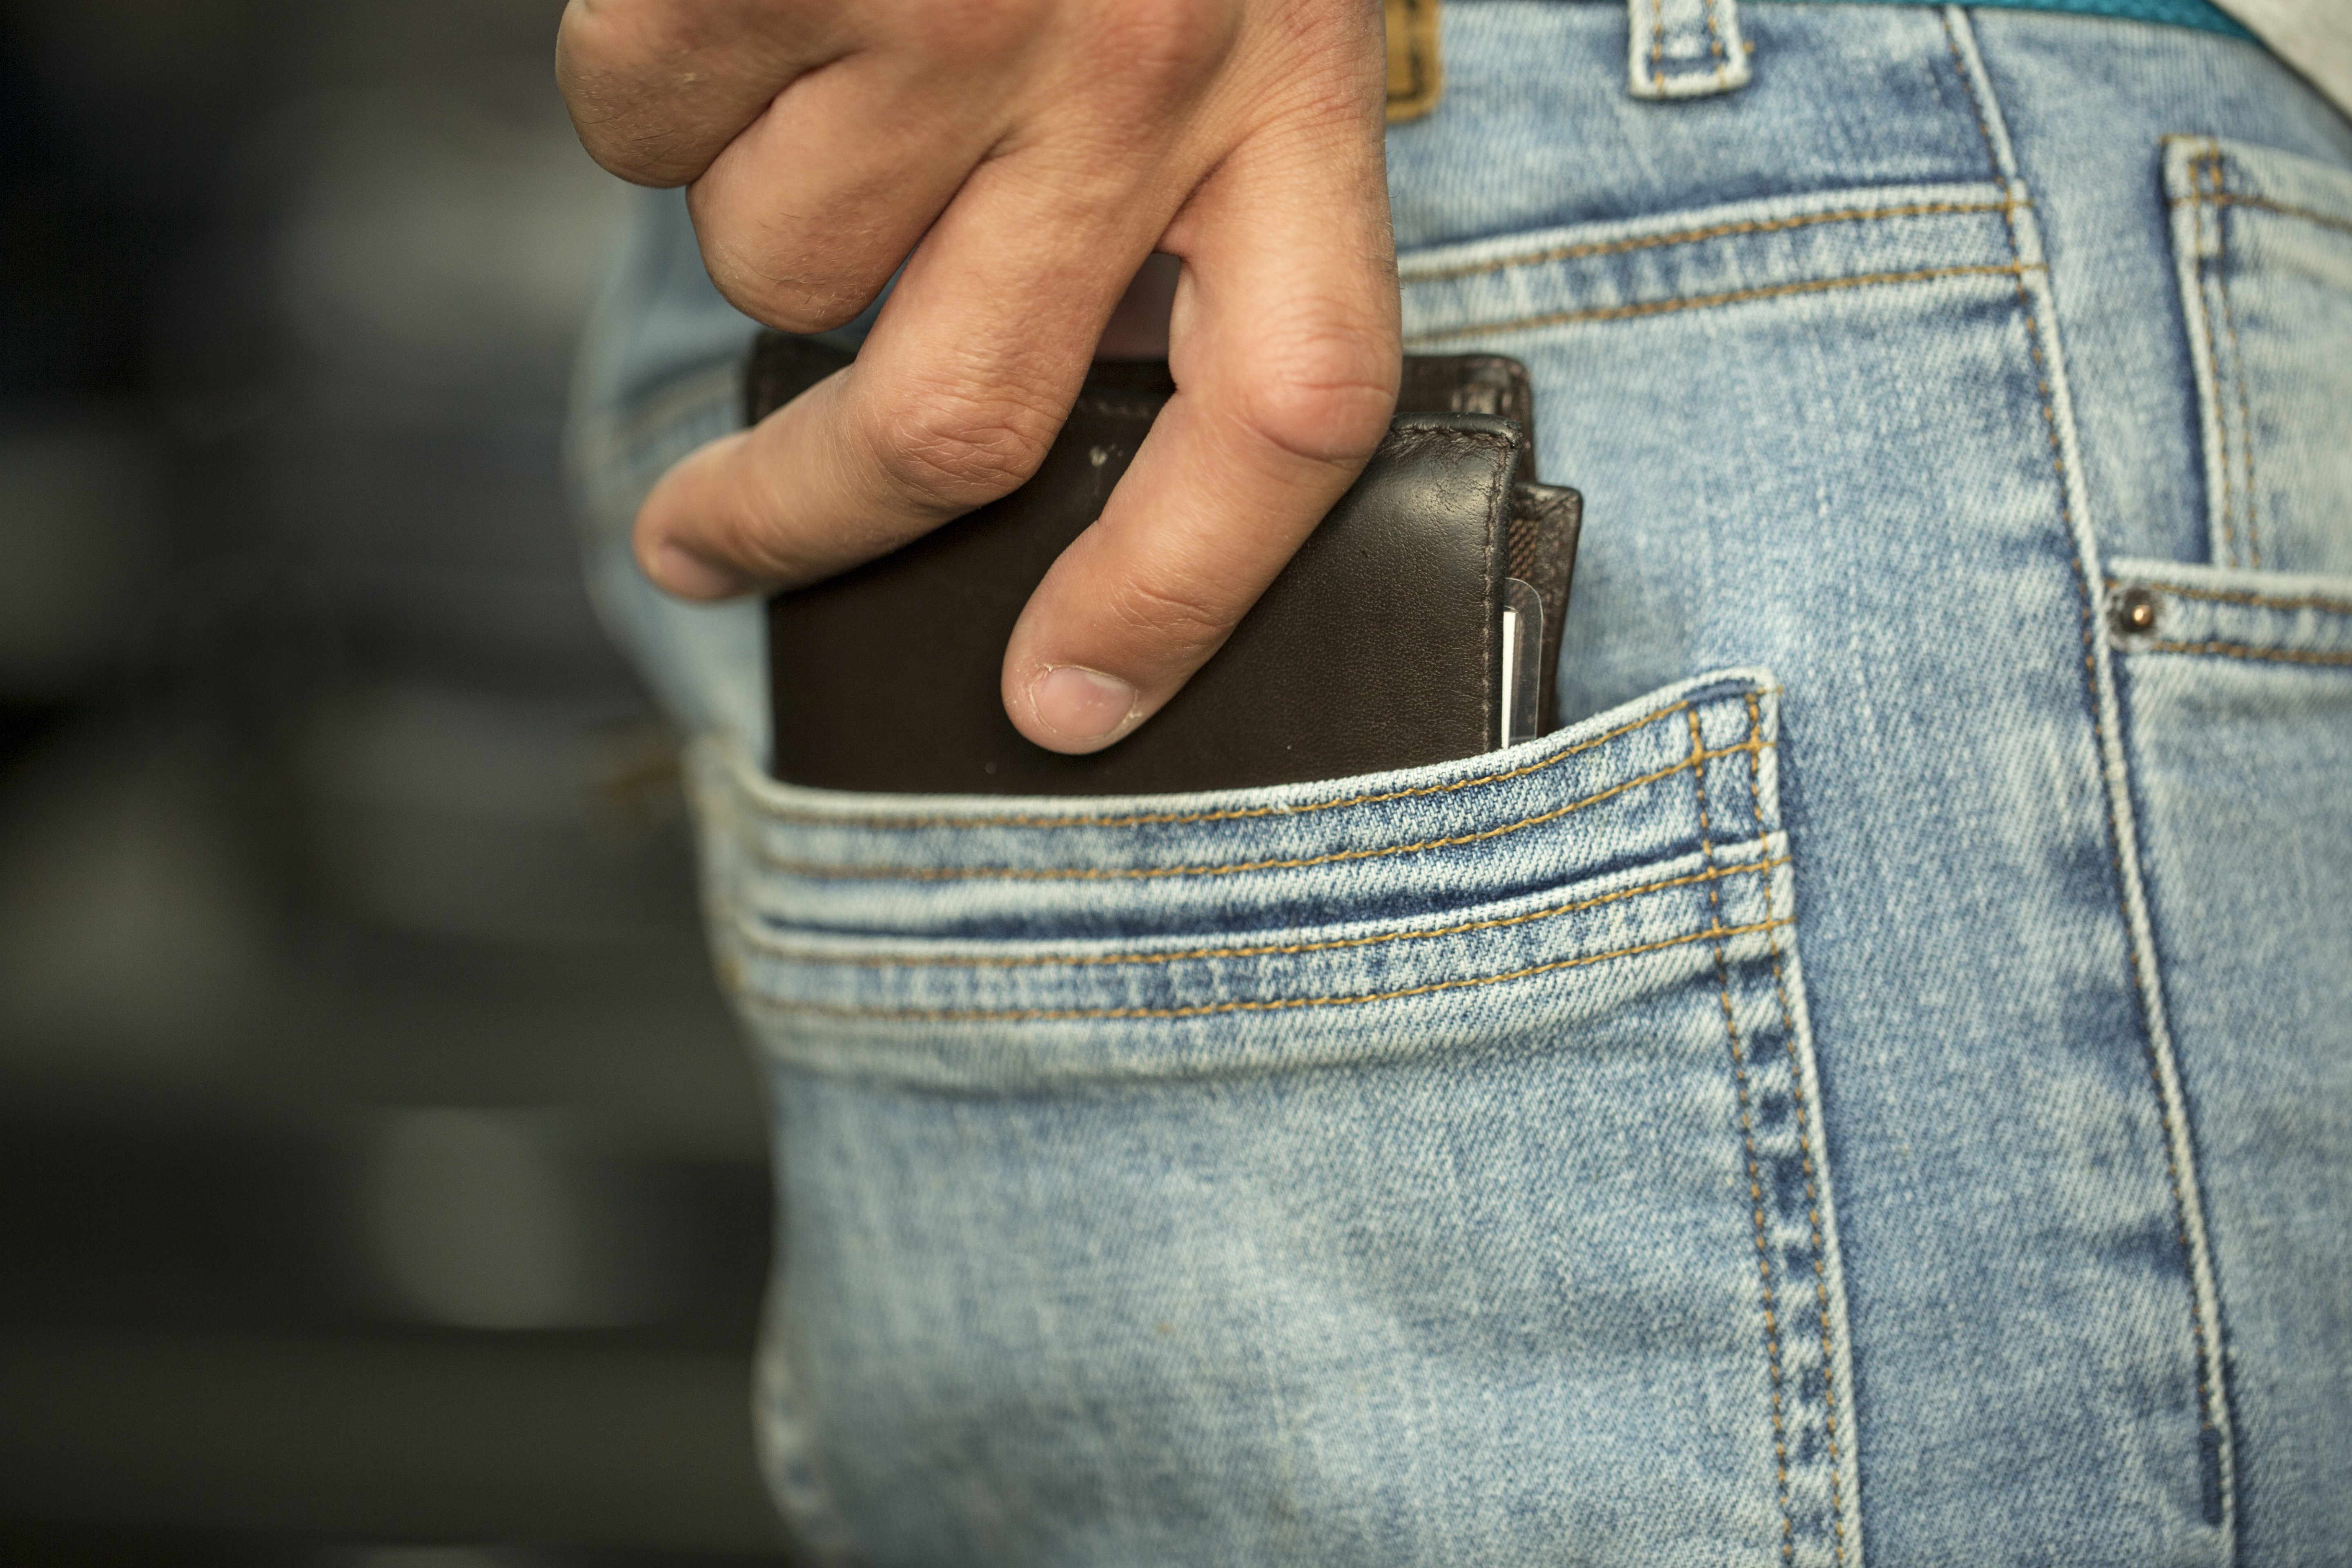 a person pulling out a wallet | Source: Shutterstock